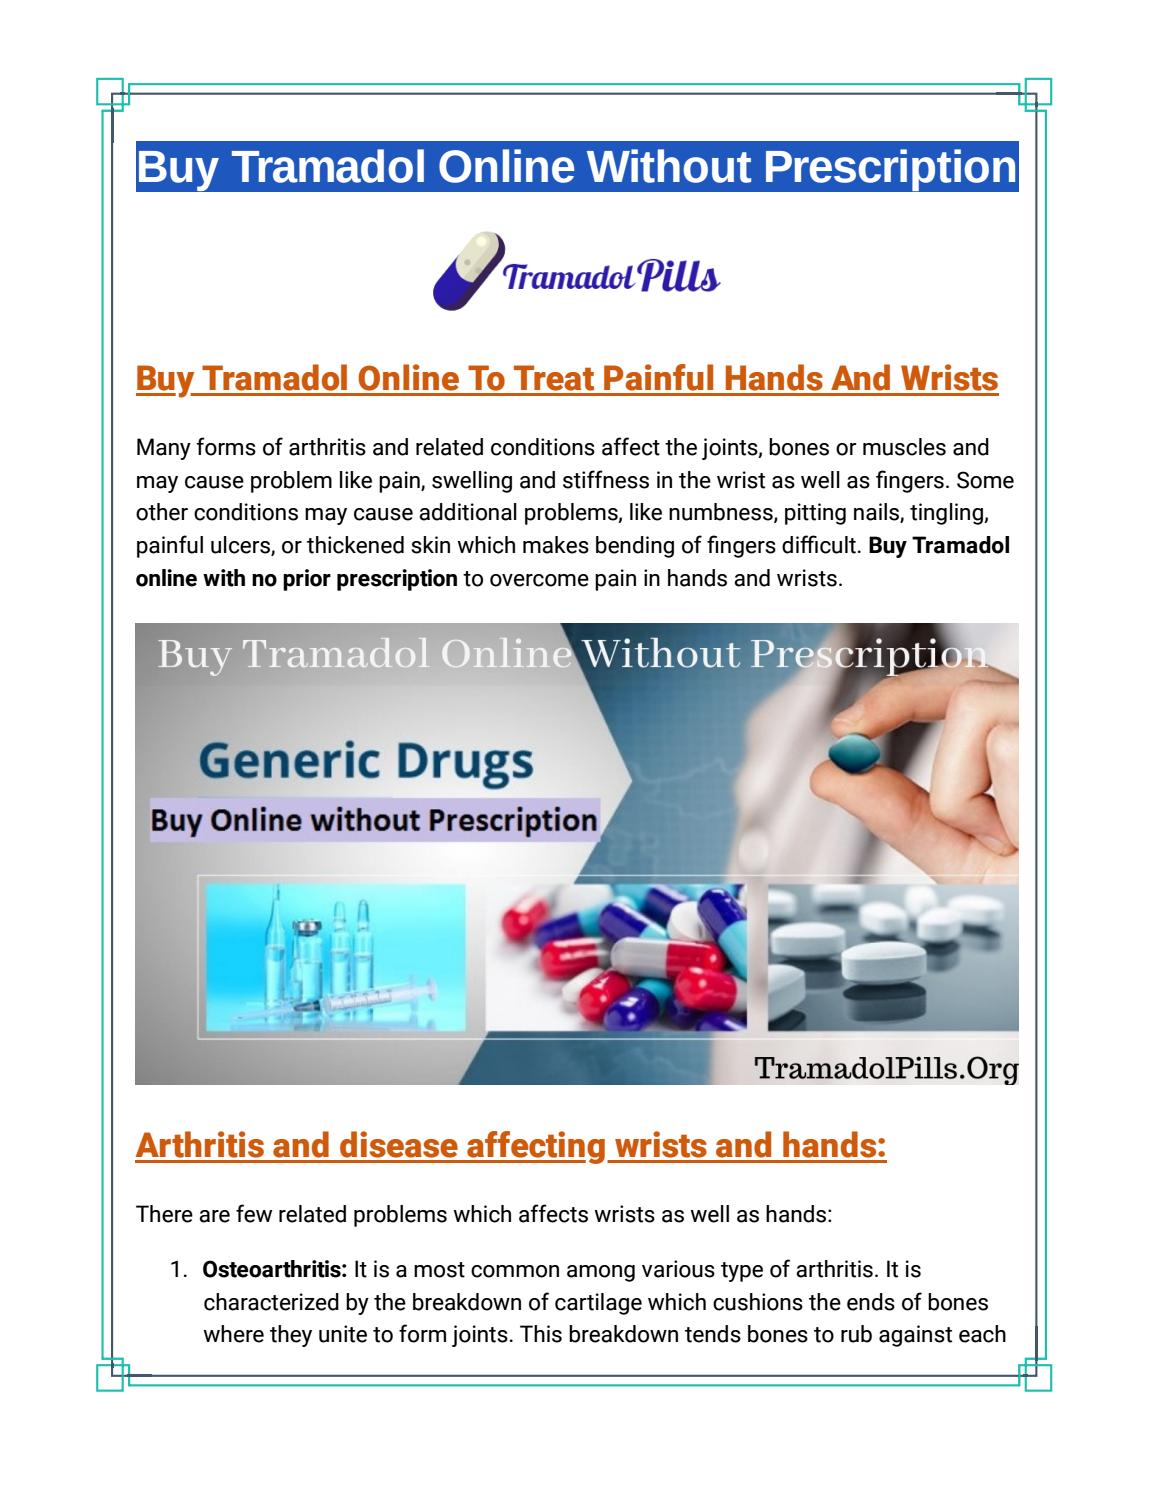 buy tramadol online without prescriptions